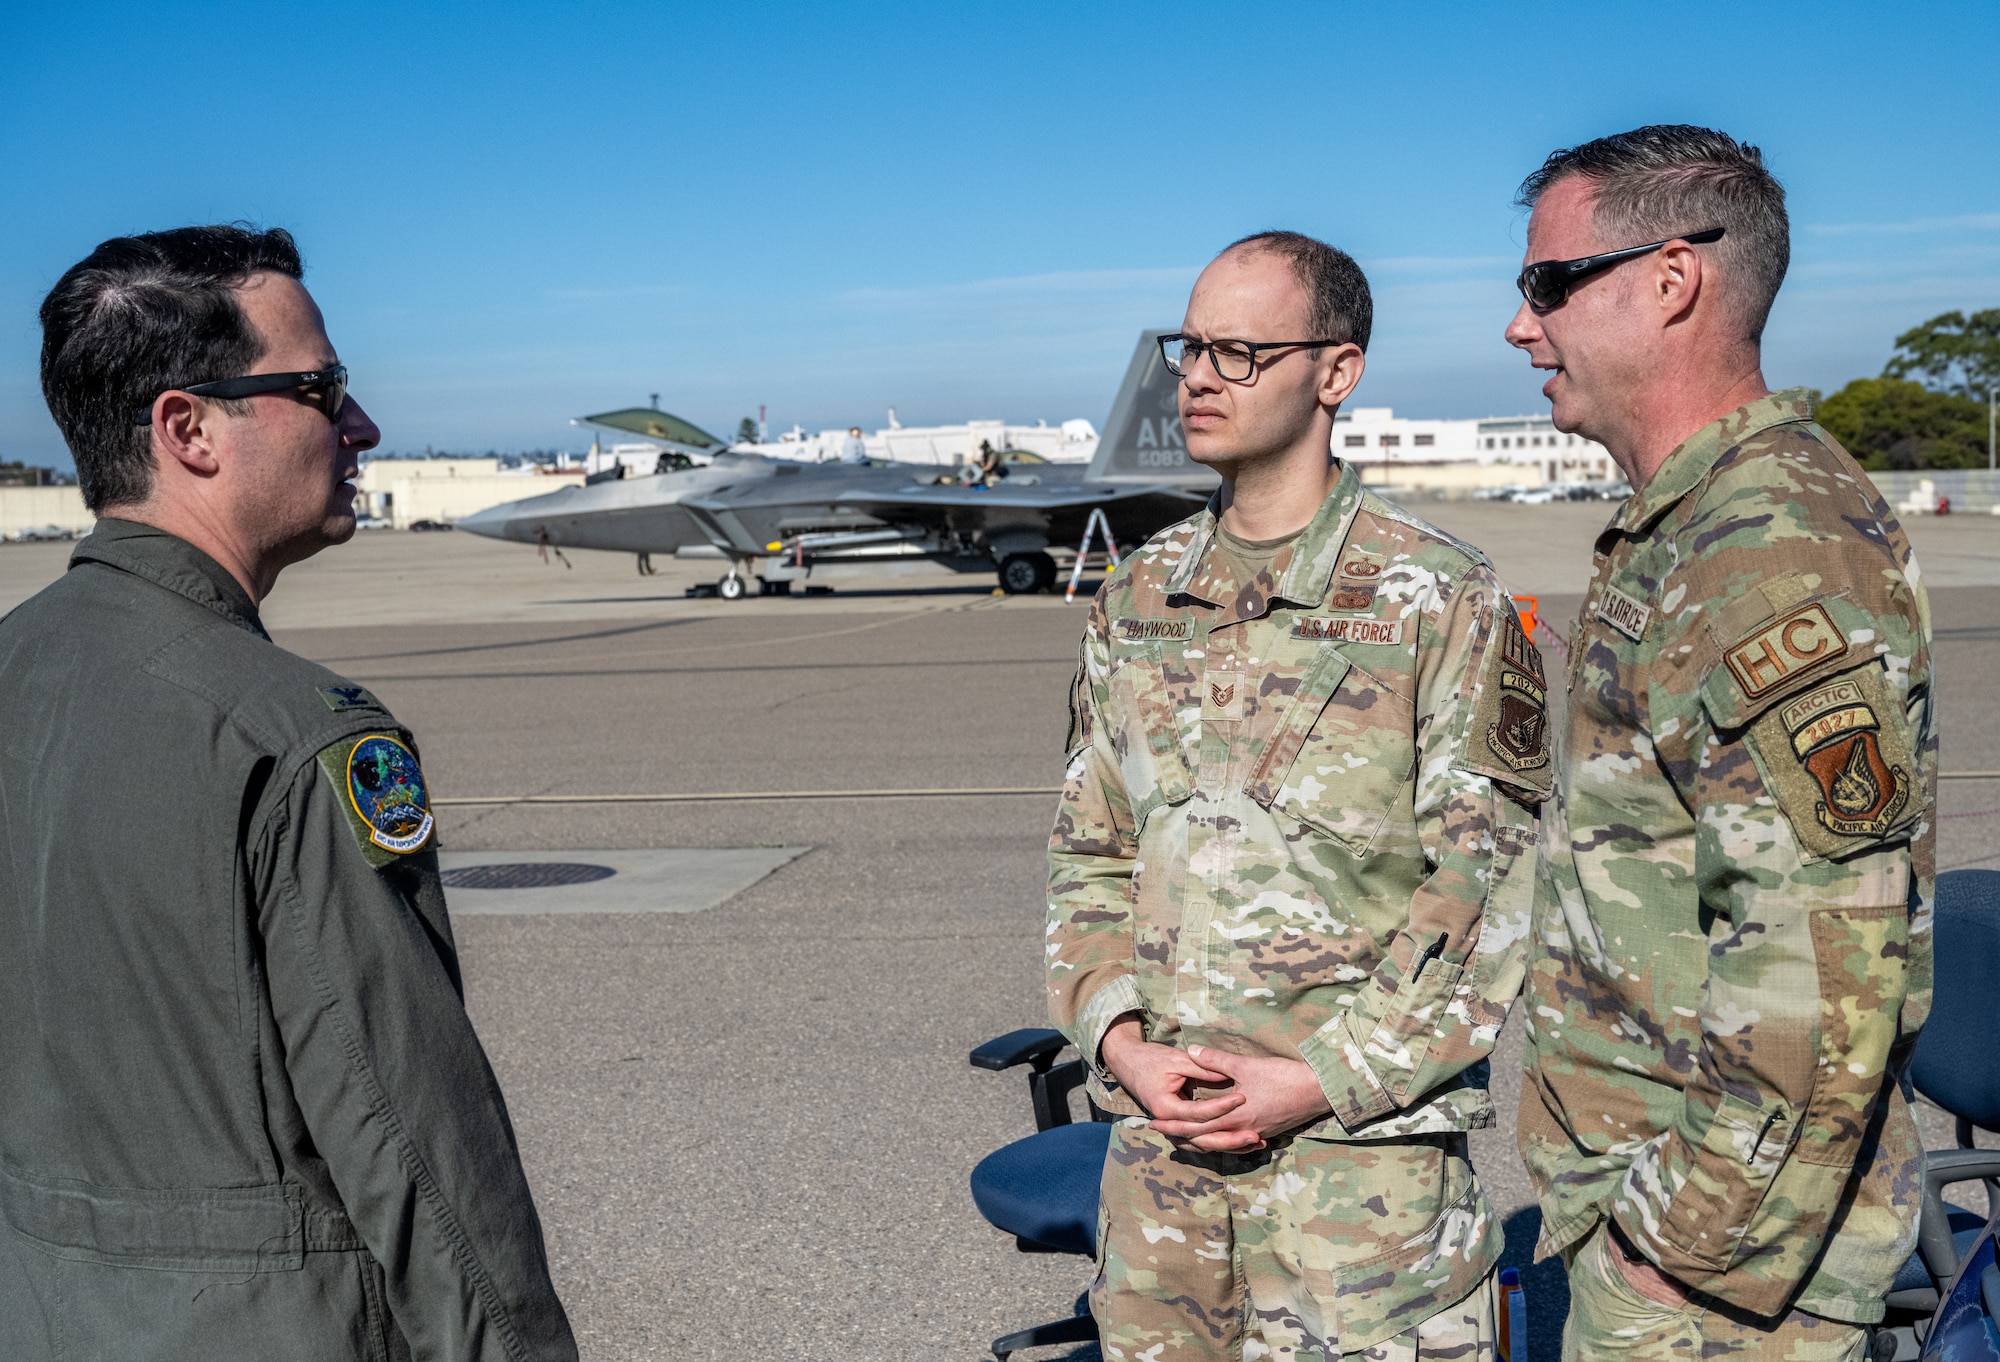 U.S. Air Force Col. Kevin Jamieson (left), 3rd Air Expeditionary Wing commander, out of Joint Base Elmendorf-Richardson, Alaska, speaks with Airmen during a site visit during Exercise Bamboo Eagle 24-1 at spoke Naval Air Station North Island, California, Jan. 31, 2024.